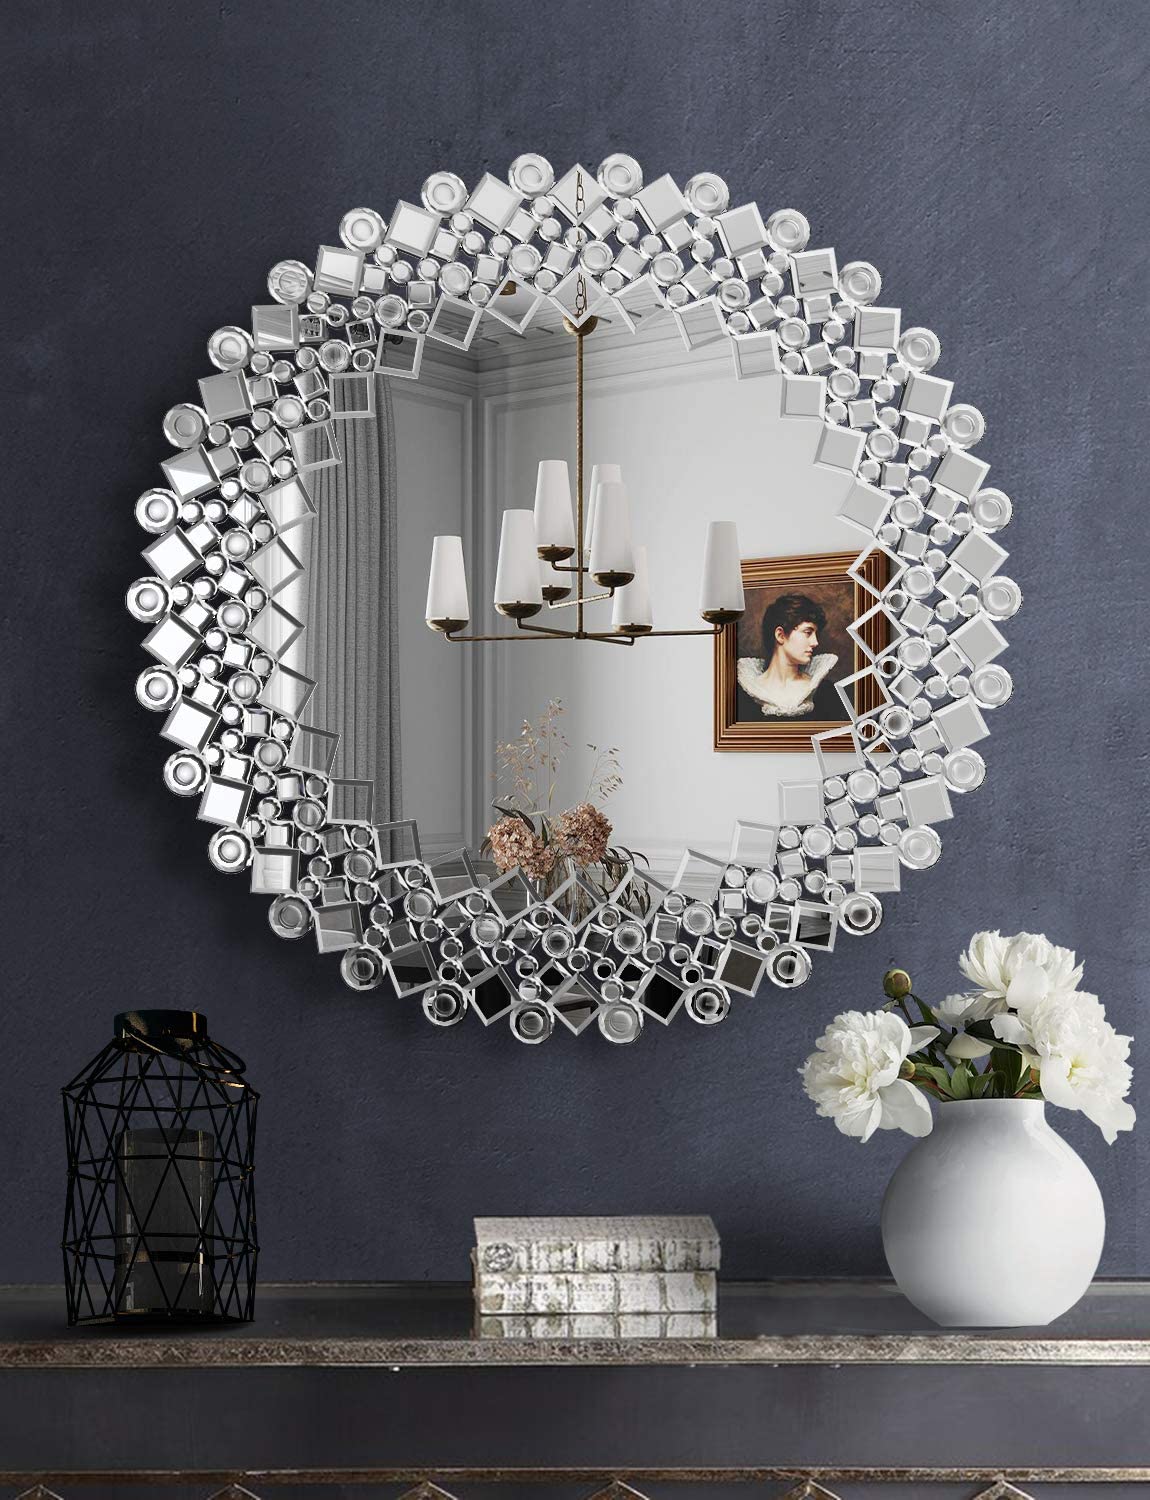 Mirror Decor Ideas: Reflection Of Style And Elegance